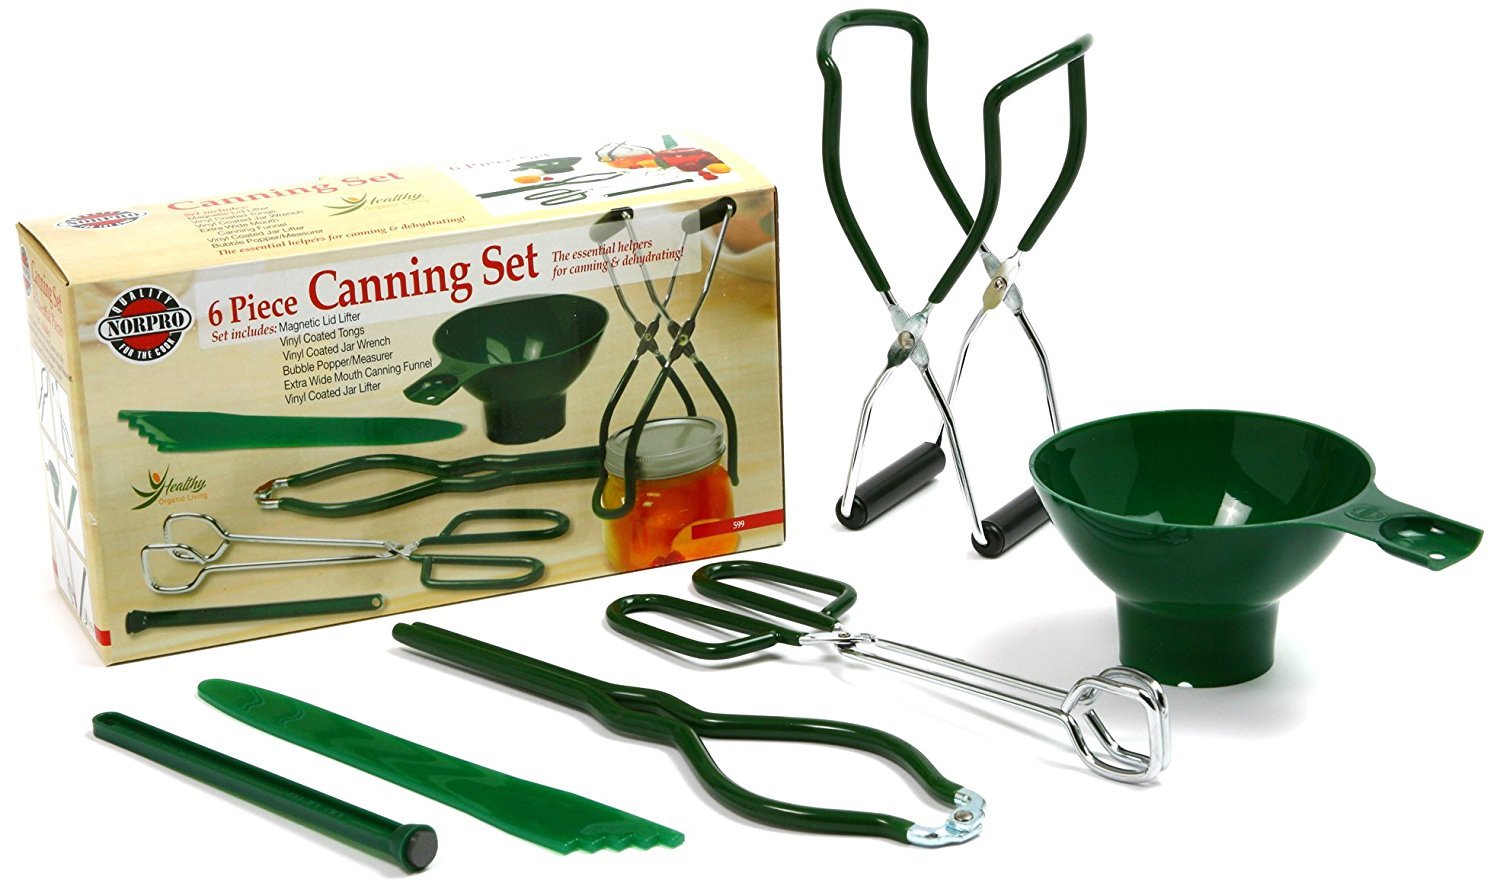 Canning Set without the Pot